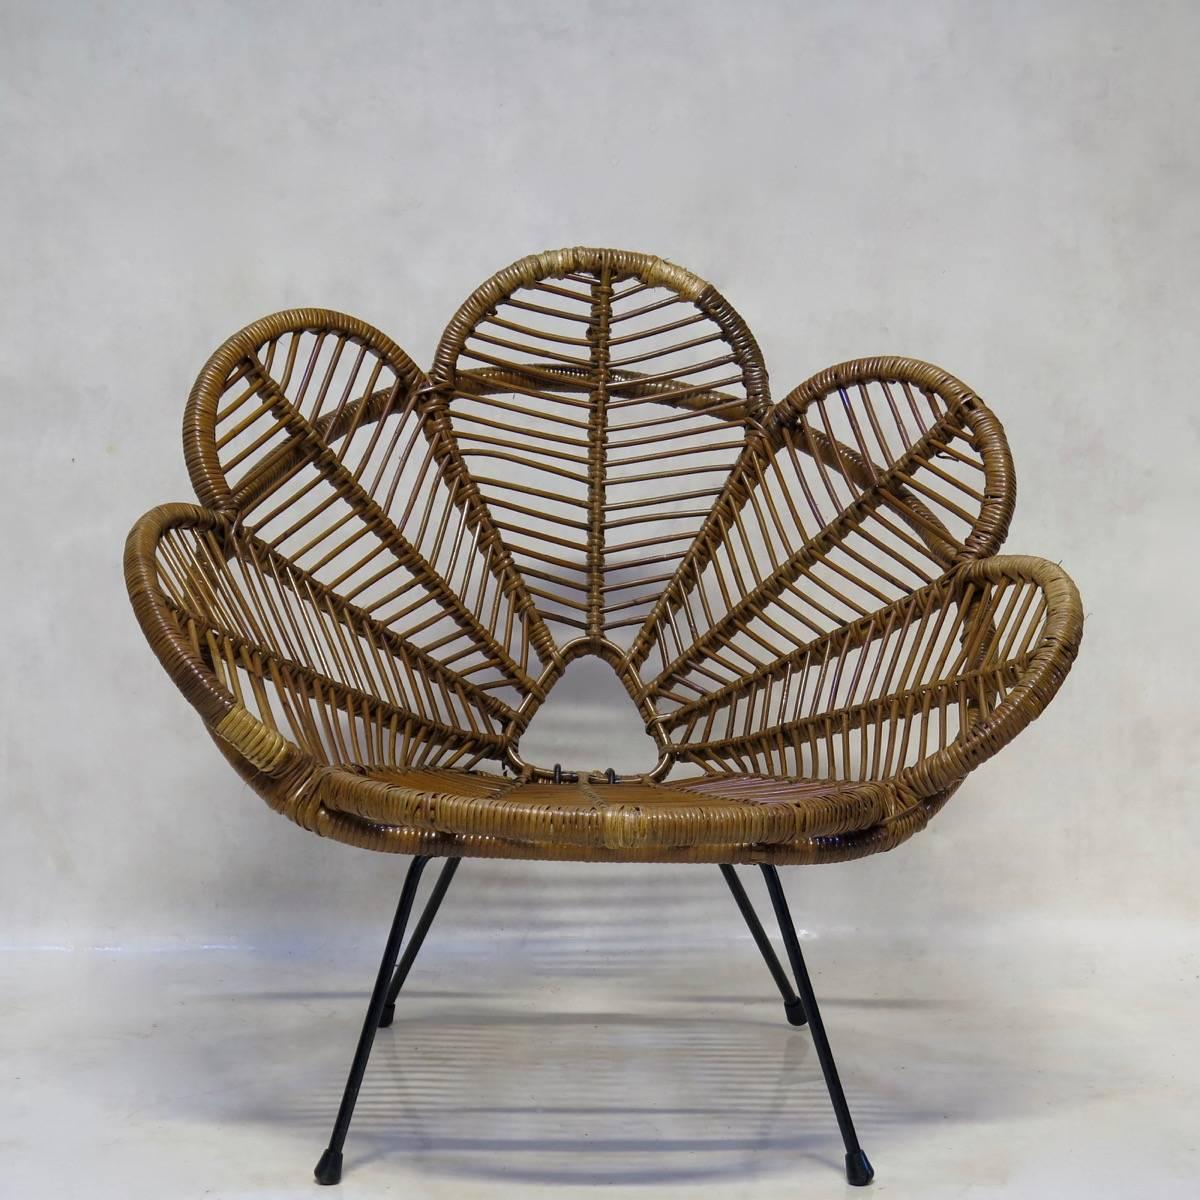 Pair of rattan lounge chairs, with unusual, flower petal shaped seats and backs, raised on black-painted iron structures.